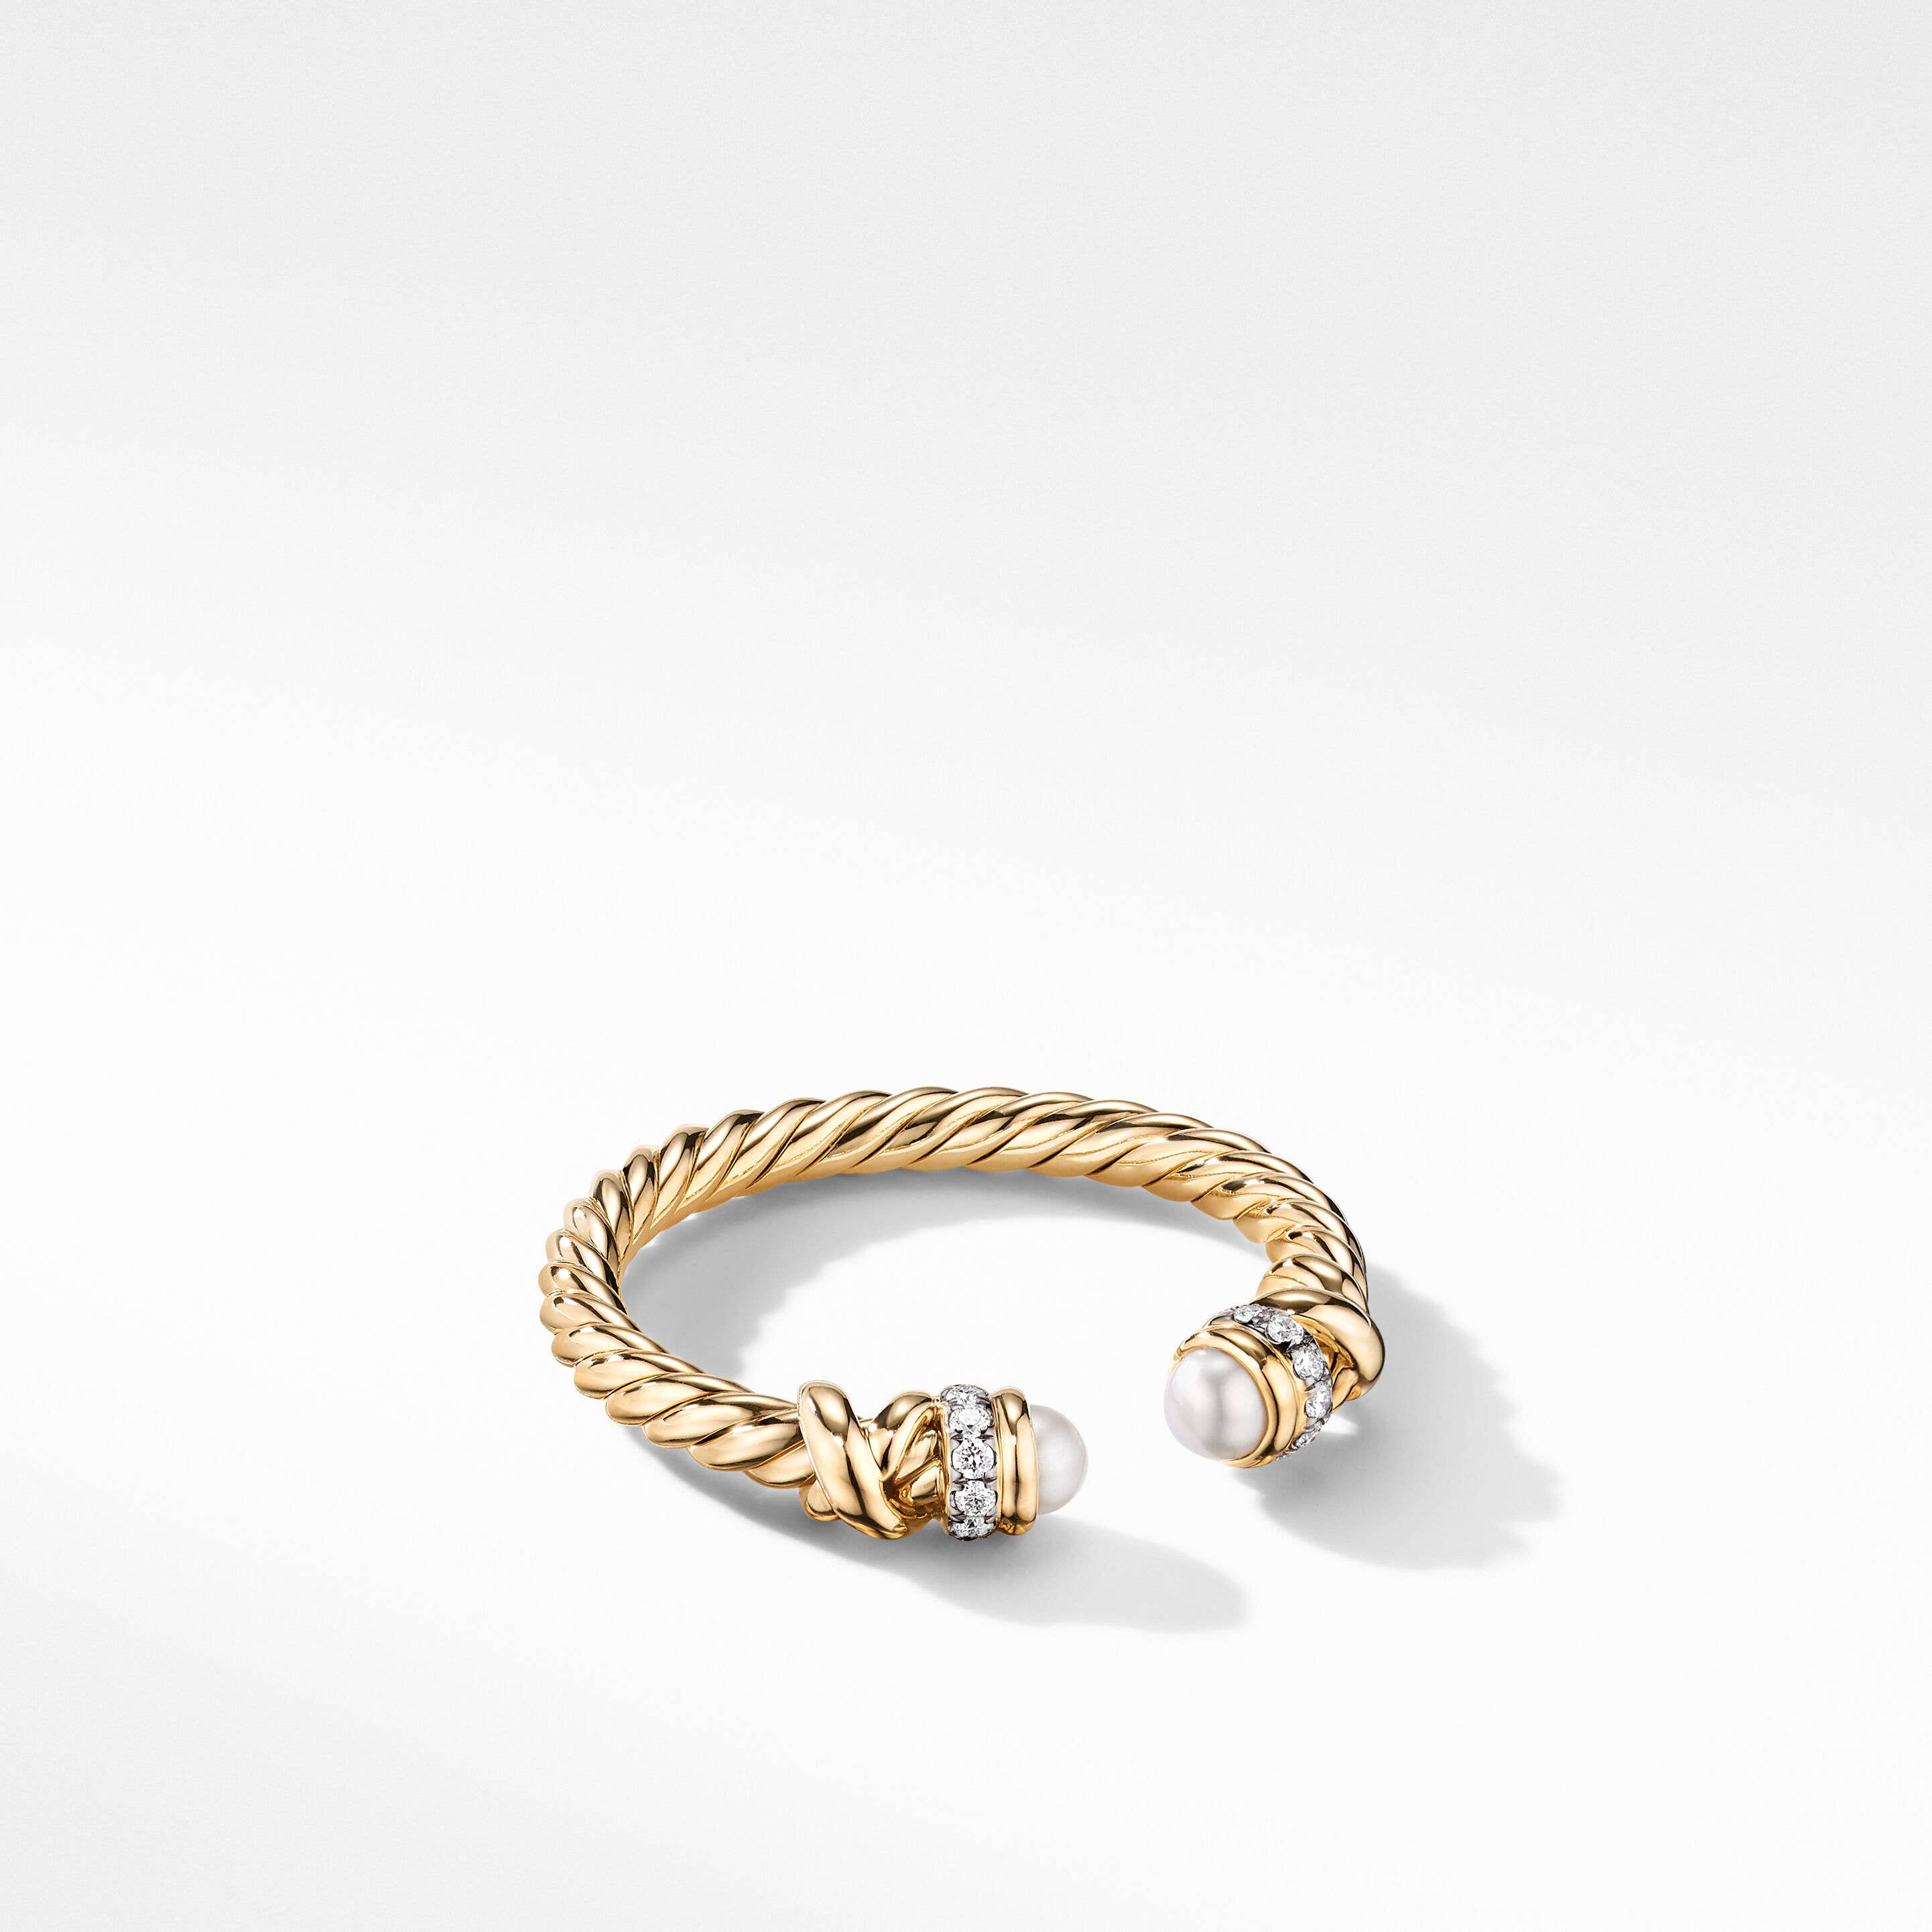 Petite Helena Color Ring in 18K Yellow Gold with Pearls and Pavé Diamonds